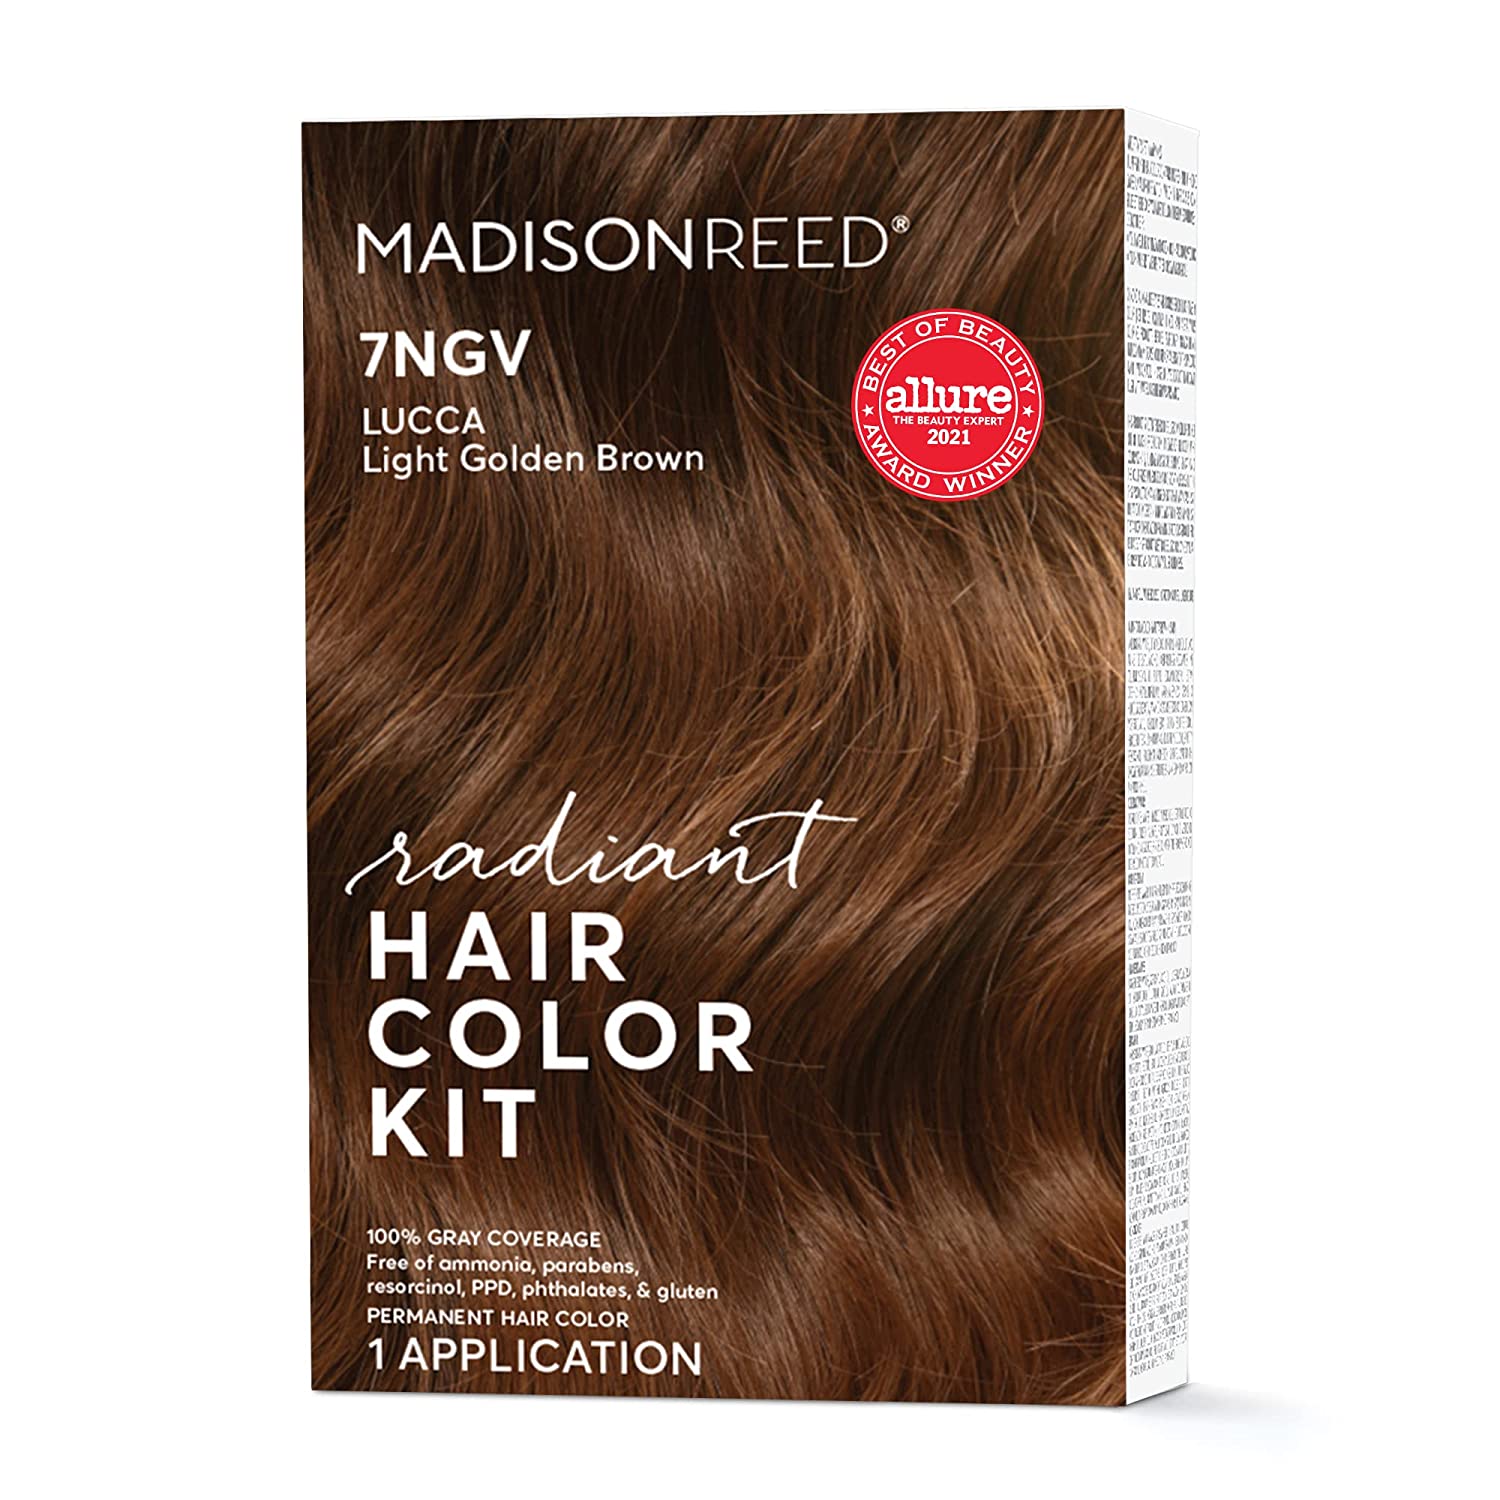 Madison Reed Radiant Hair Color Kit, Permanent Hair Dye, 100% Gray Coverage, Ammonia-Free - Lucca Light Golden Brown 7NGV